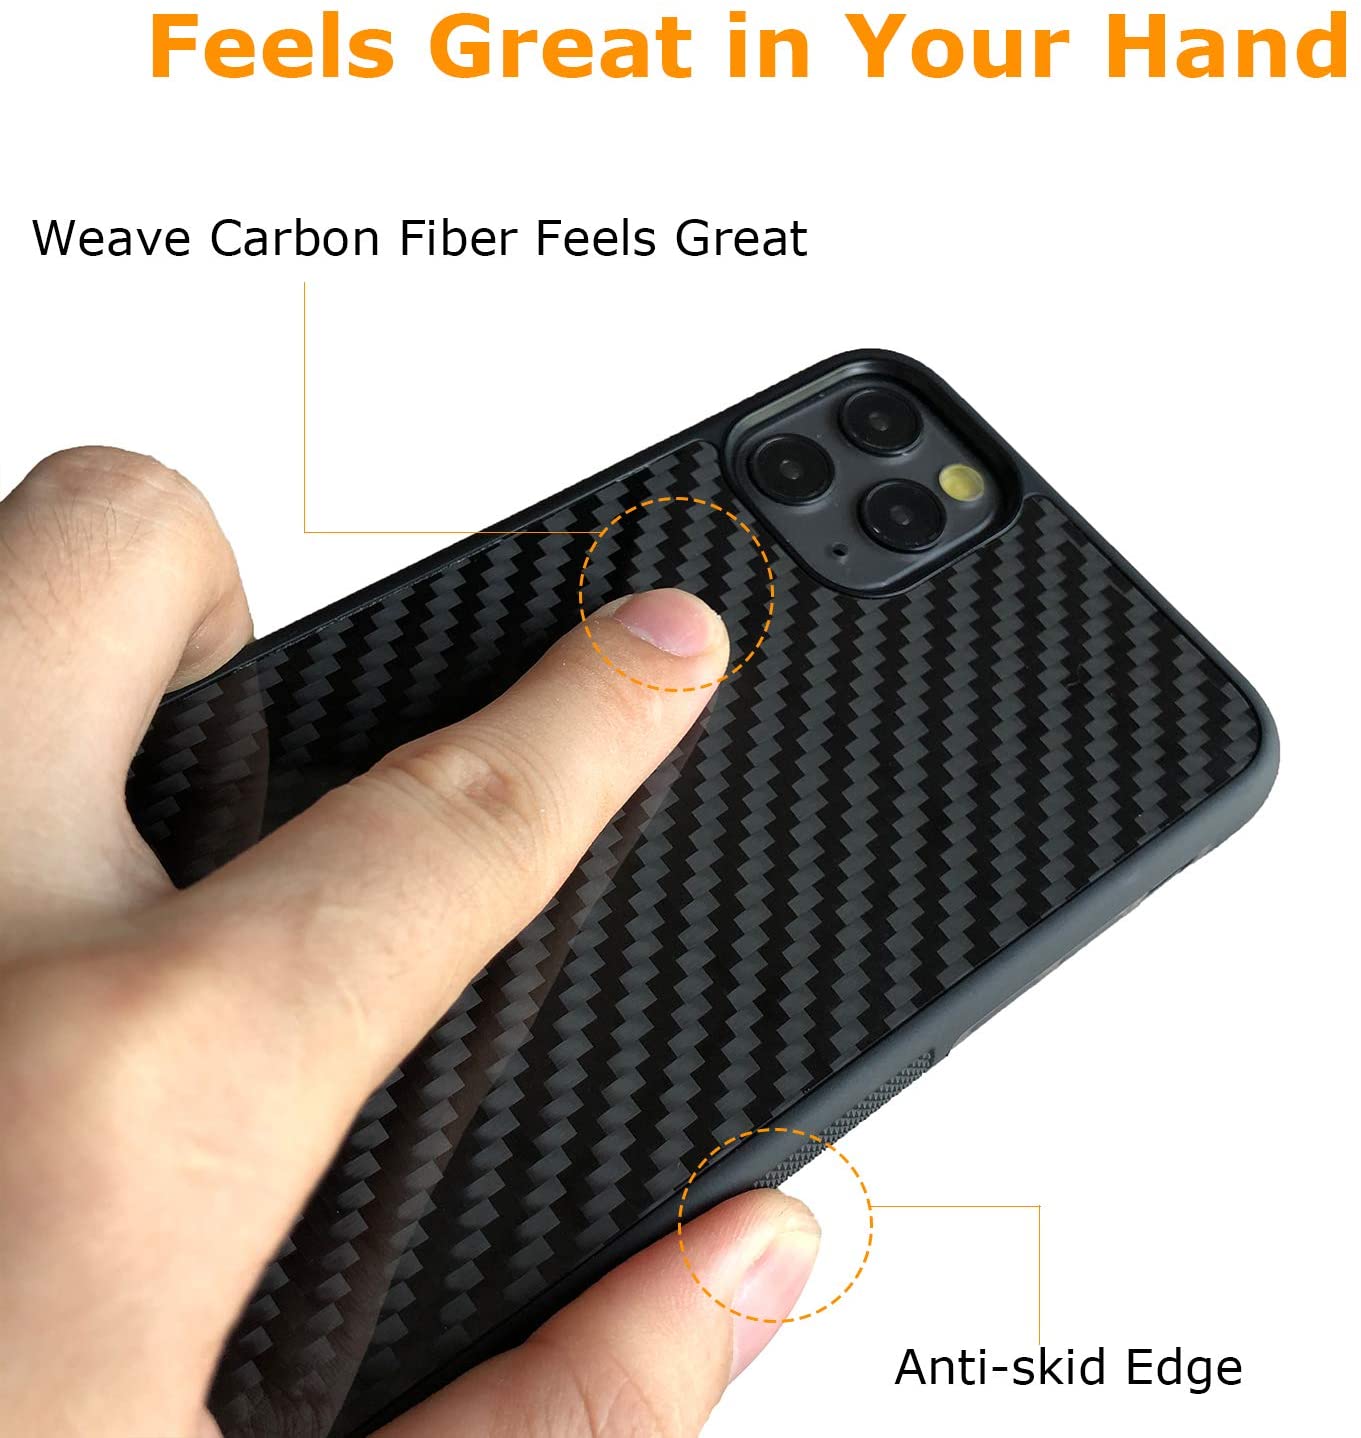 Molzar Grip Series iPhone 11 Pro Max Case with Real Weave Carbon Fiber - Molzar-iphone cases and accessories